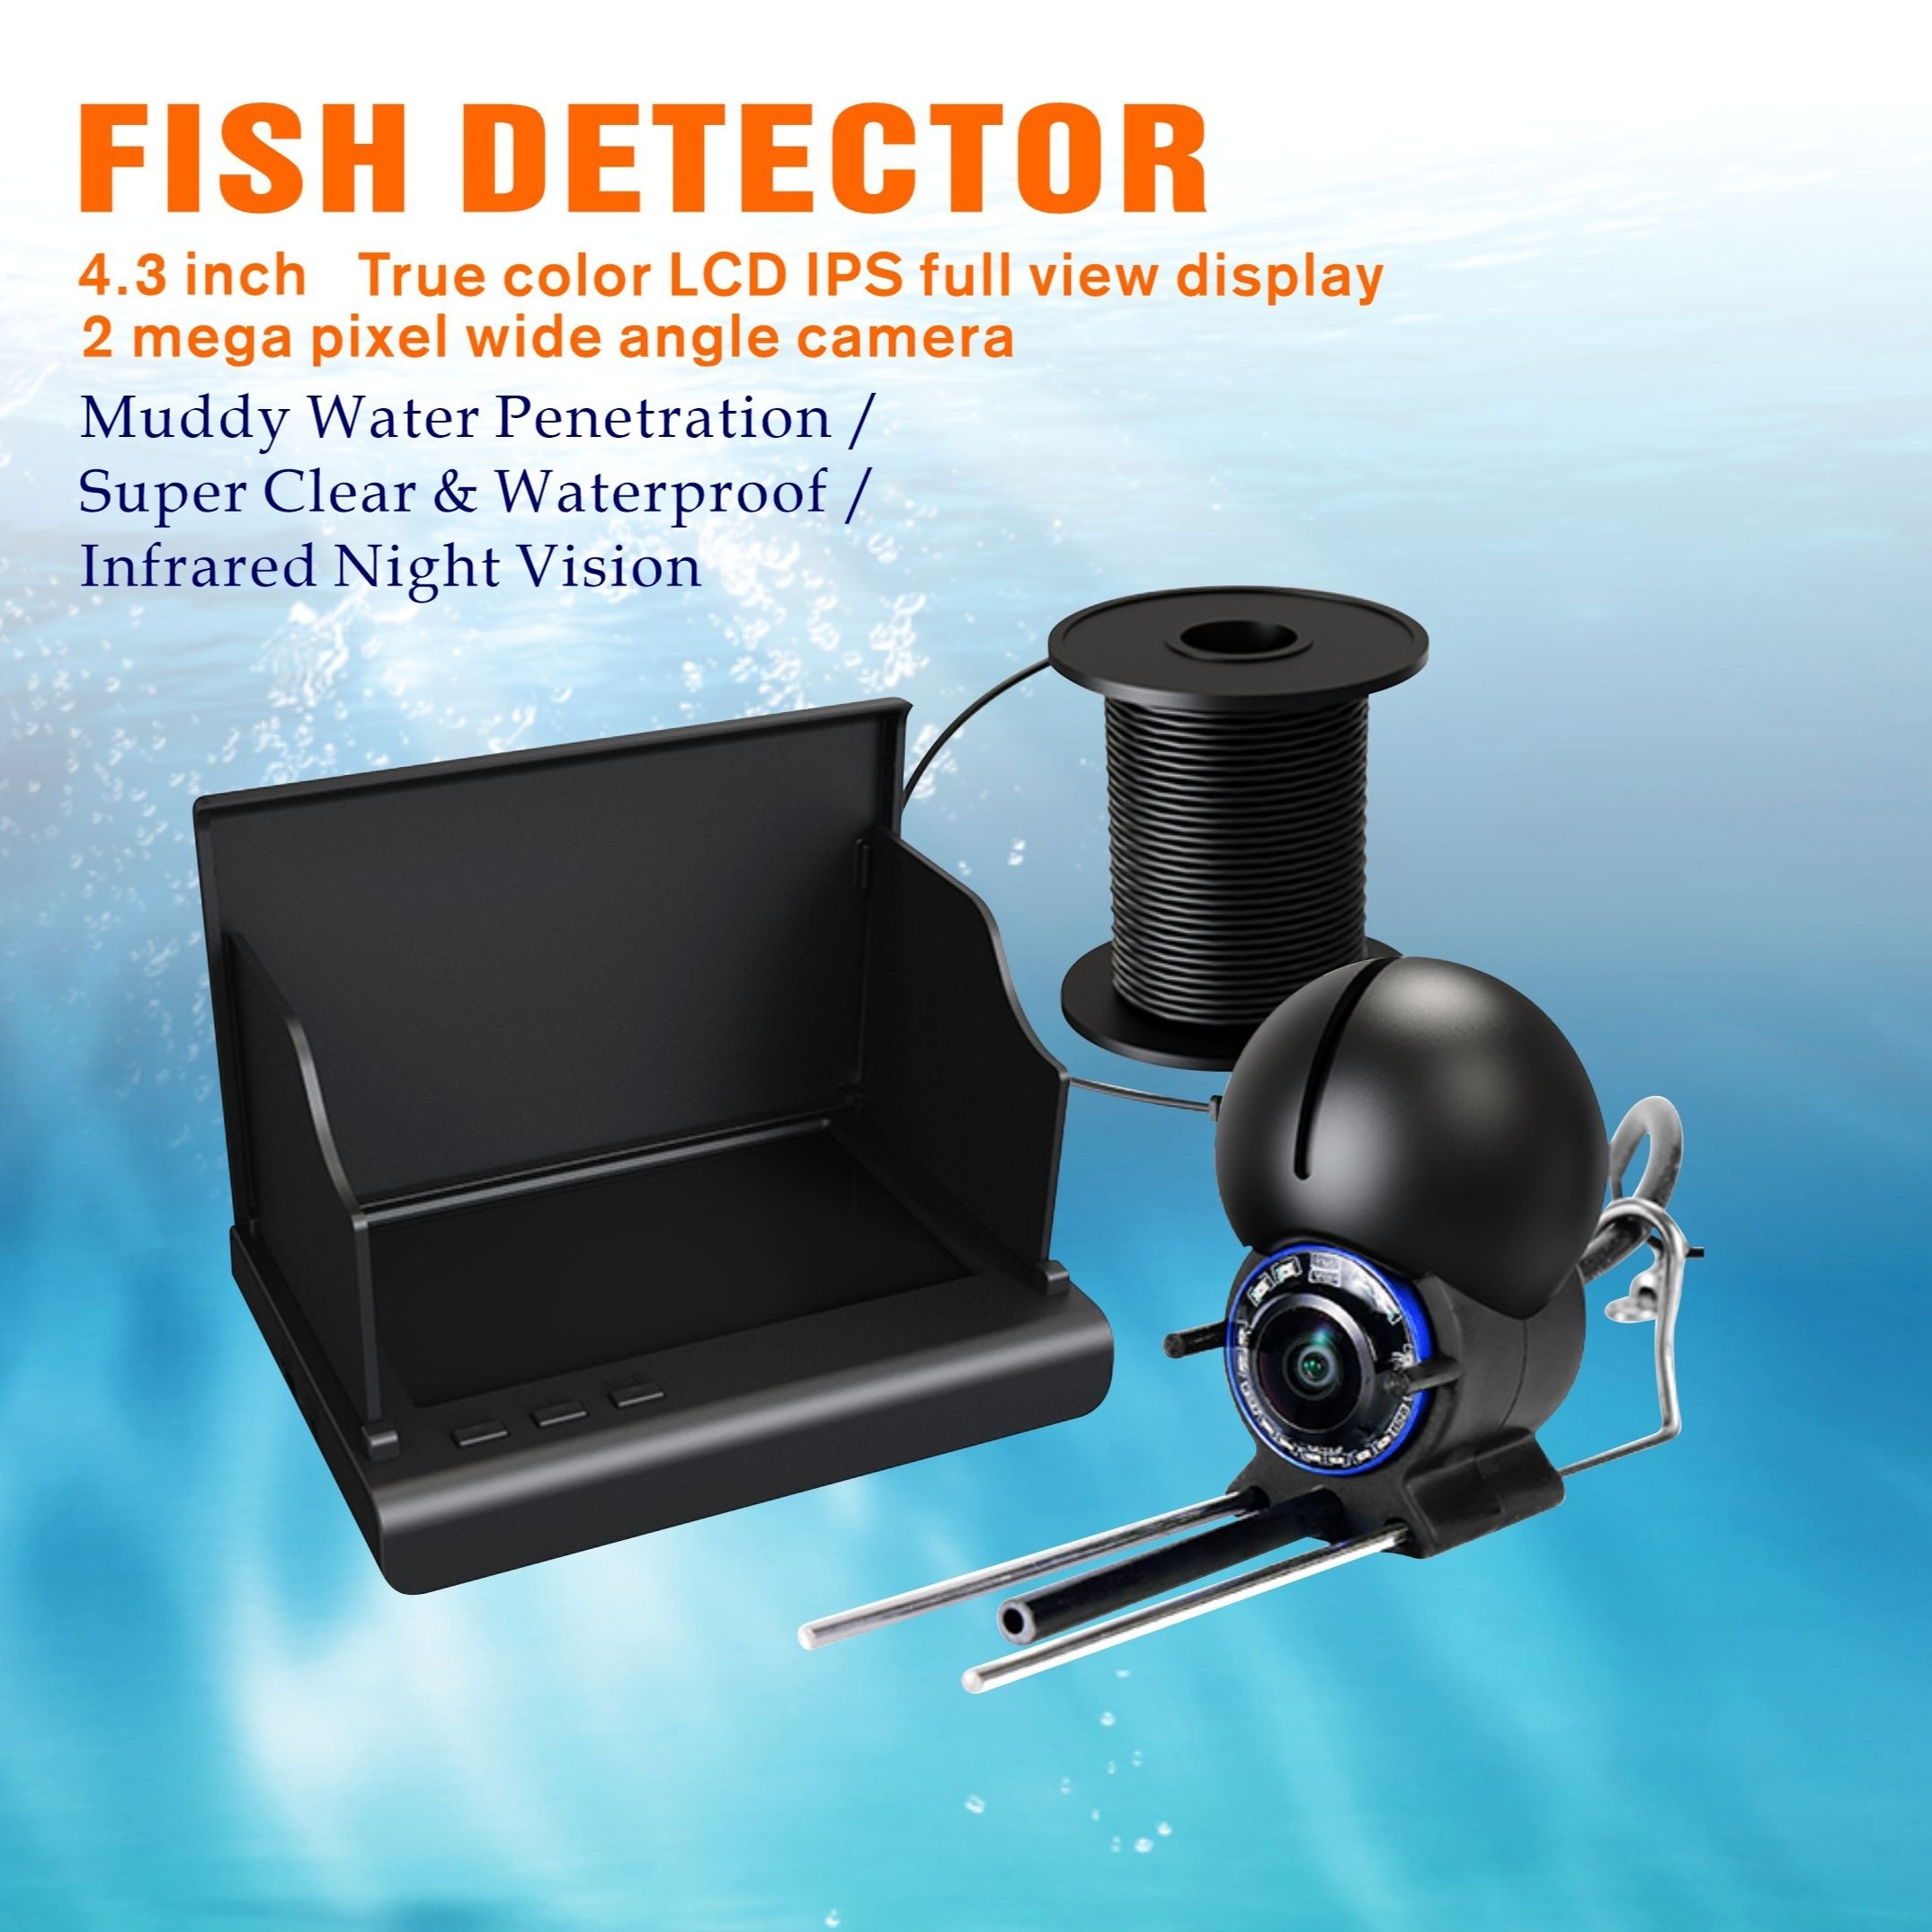 1500LUX Underwater Fishing Camera With Infrared LED, 4.3 Inch IPS Monitor,  And 30m/98.4ft Cable - Capture Clear Images And Videos Of Fish And Underwat